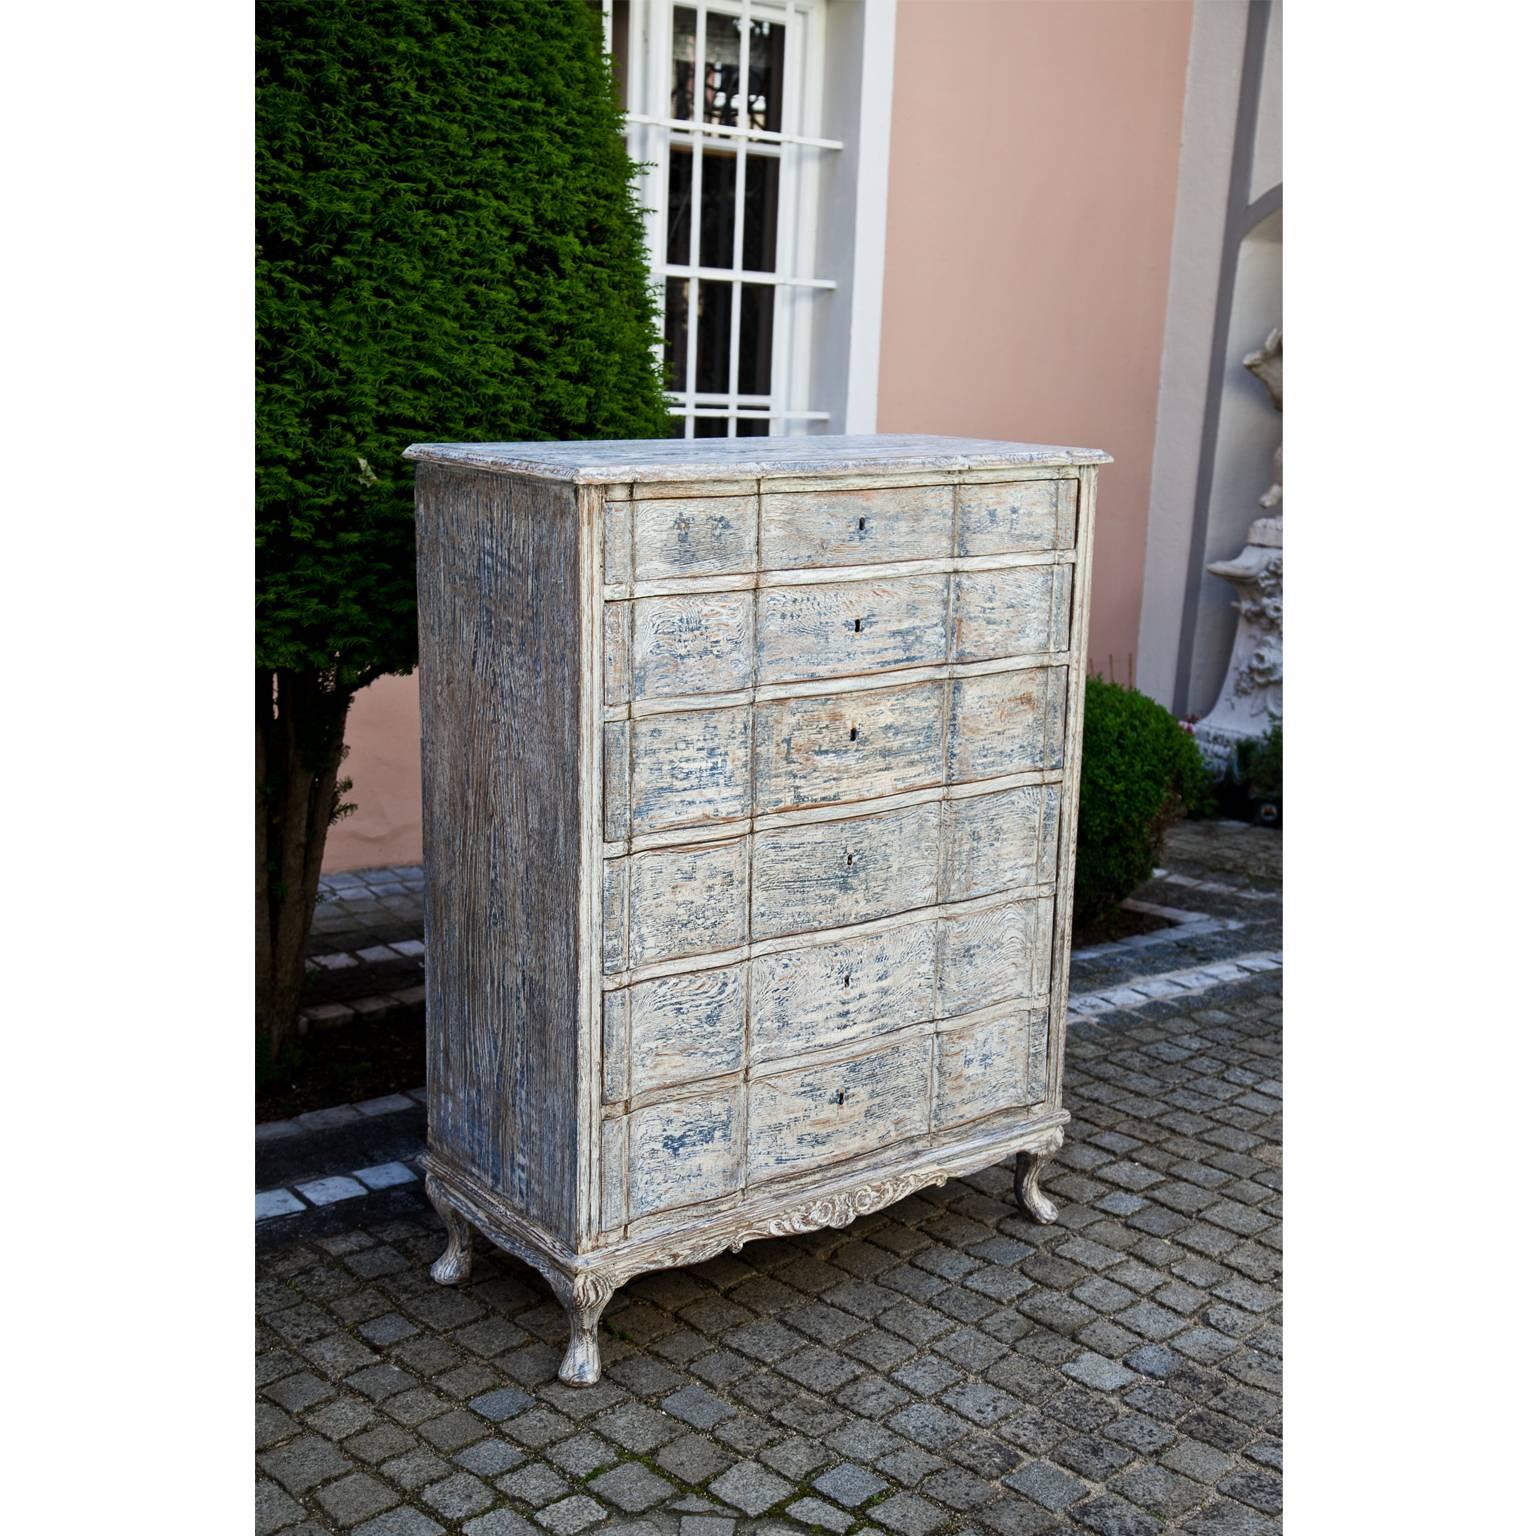 Six-drawered chest of drawers with a playful skirt and serpentine front in Gustavian Style. The paint is new and has a decorative worn look to it.